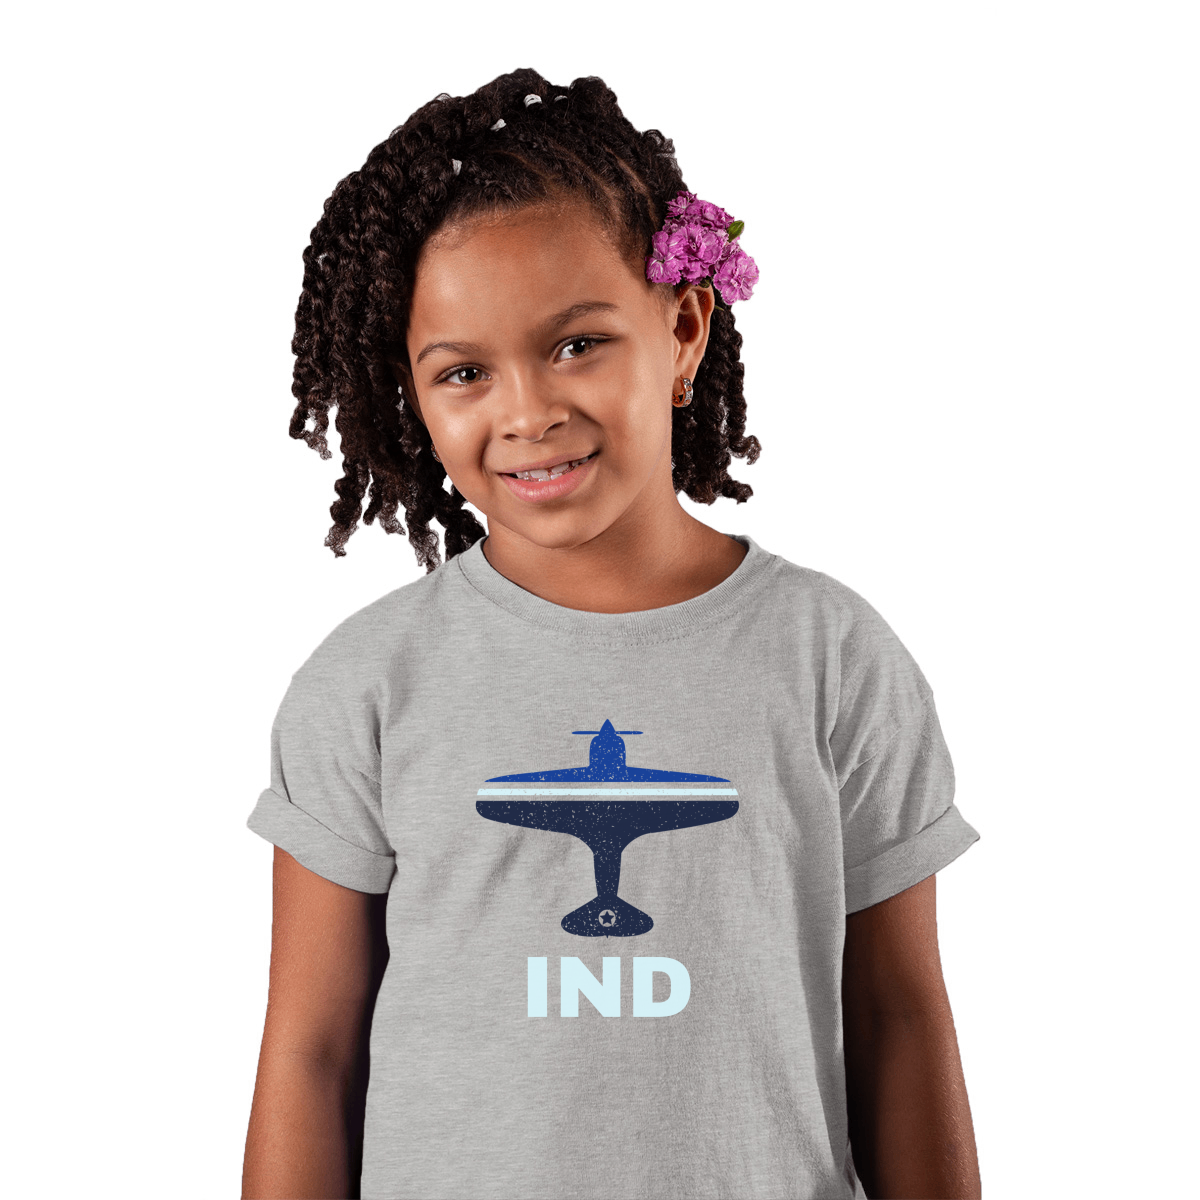 Fly Indianapolis IND Airport Kids T-shirt | Gray